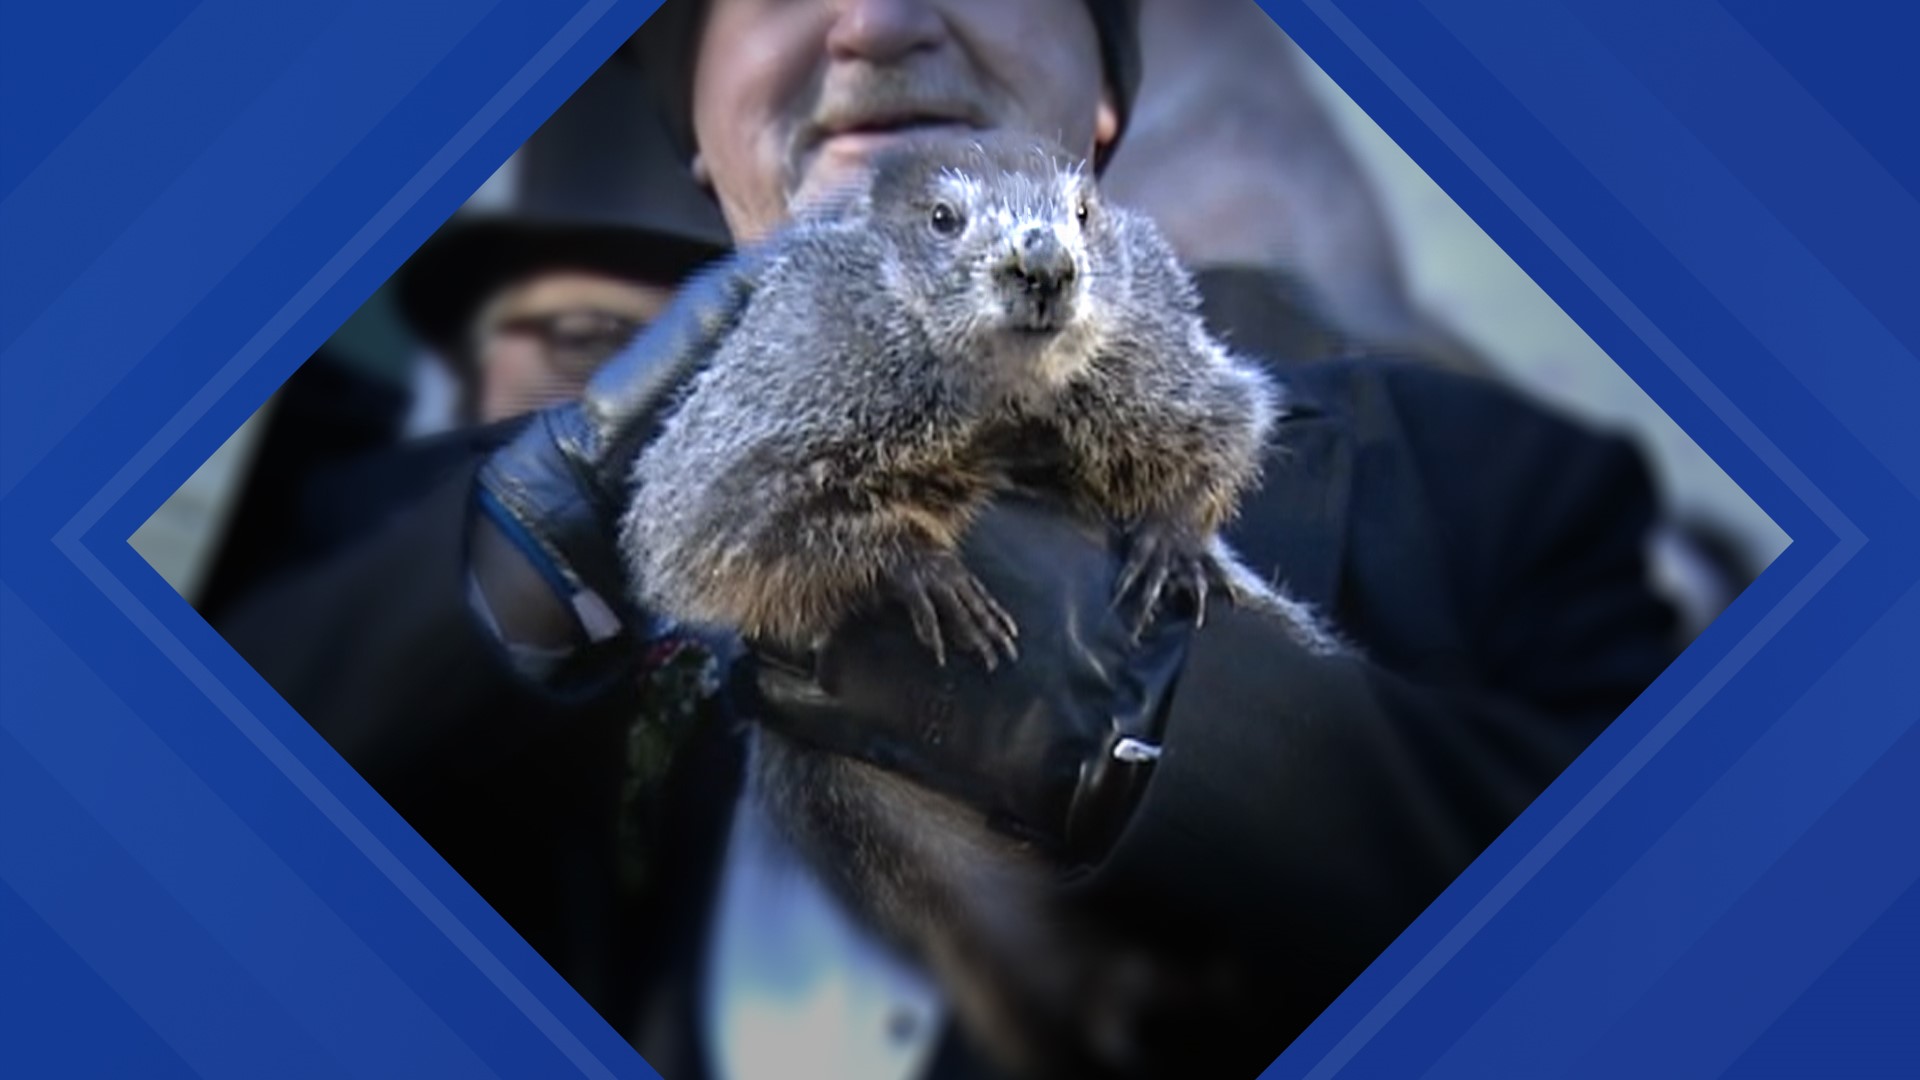 Stormtracker 16 Meteorologist Ally Gallo takes a look at animals that may be better at forecasting the weather than a groundhog.